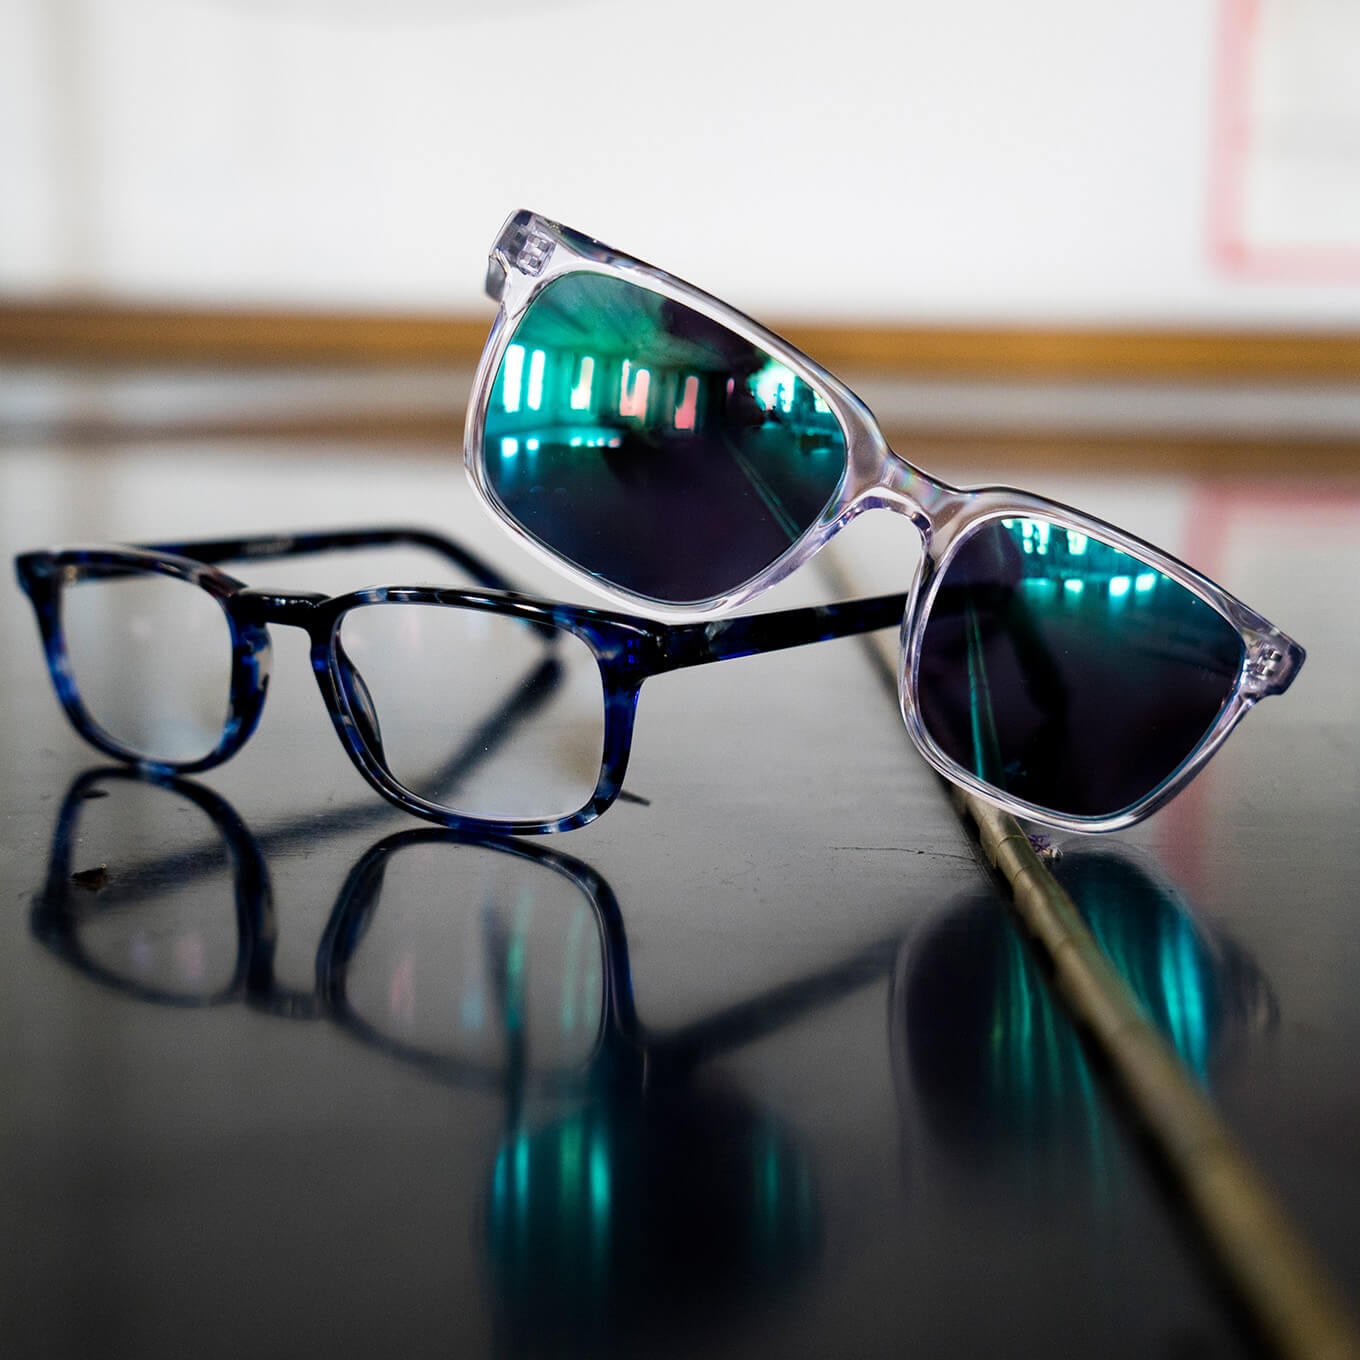 Translucent Van Alen sunglasses with green mirror tint and blue tortoiseshell Eames rectangle eyeglasses from the Zenni Metropolitan Collection are pictured together.